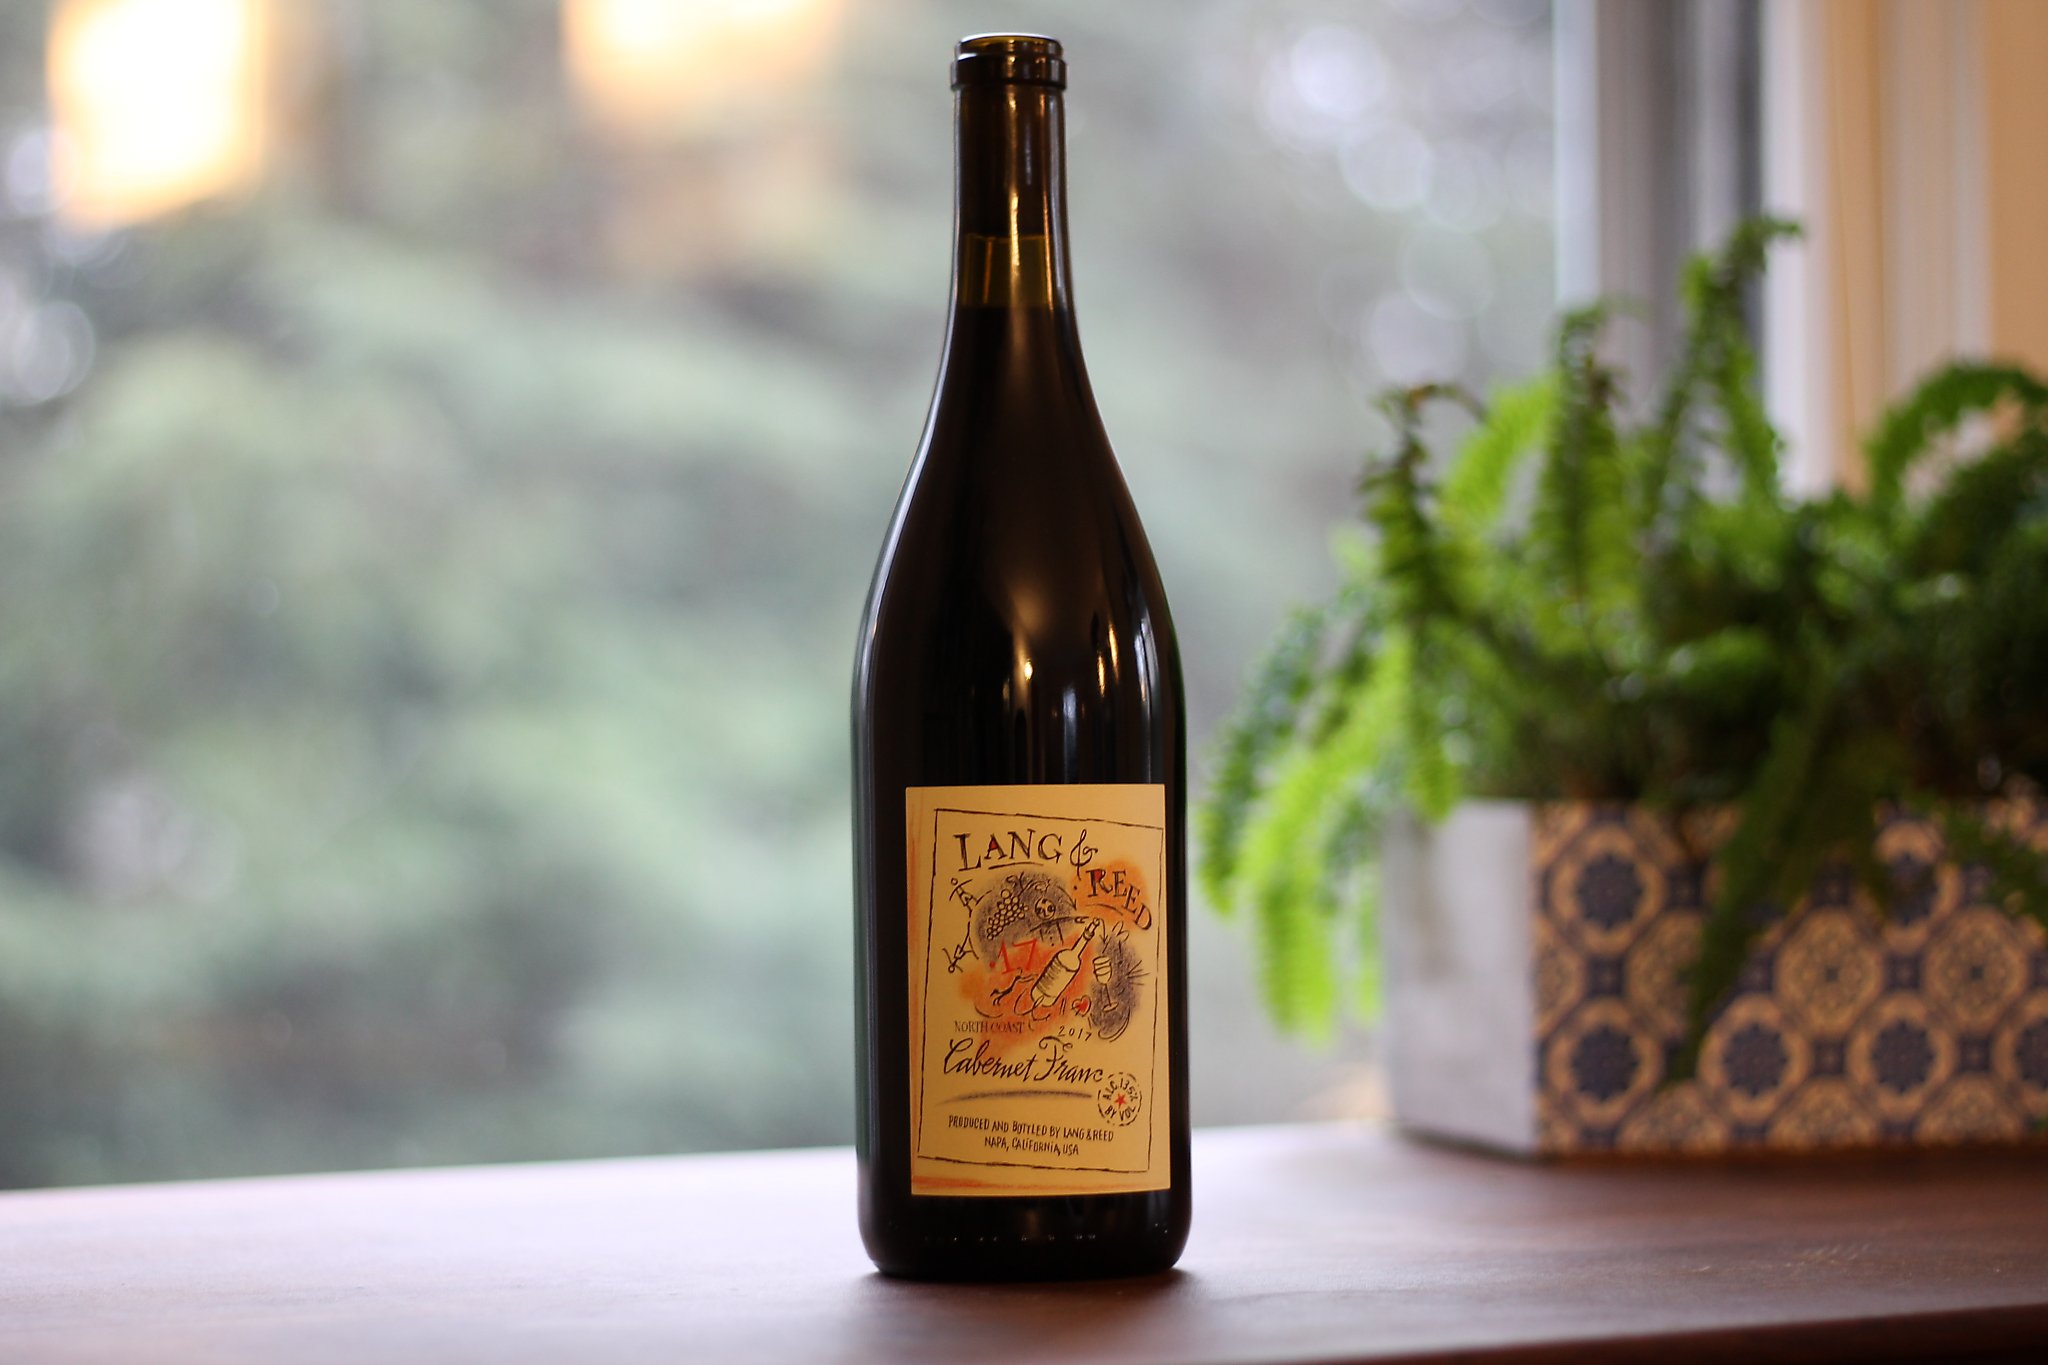 Get To Know Lang & Reed, The Rare Napa Winery Focused On Cabernet Franc, With This Wintery $29 Bottle photo